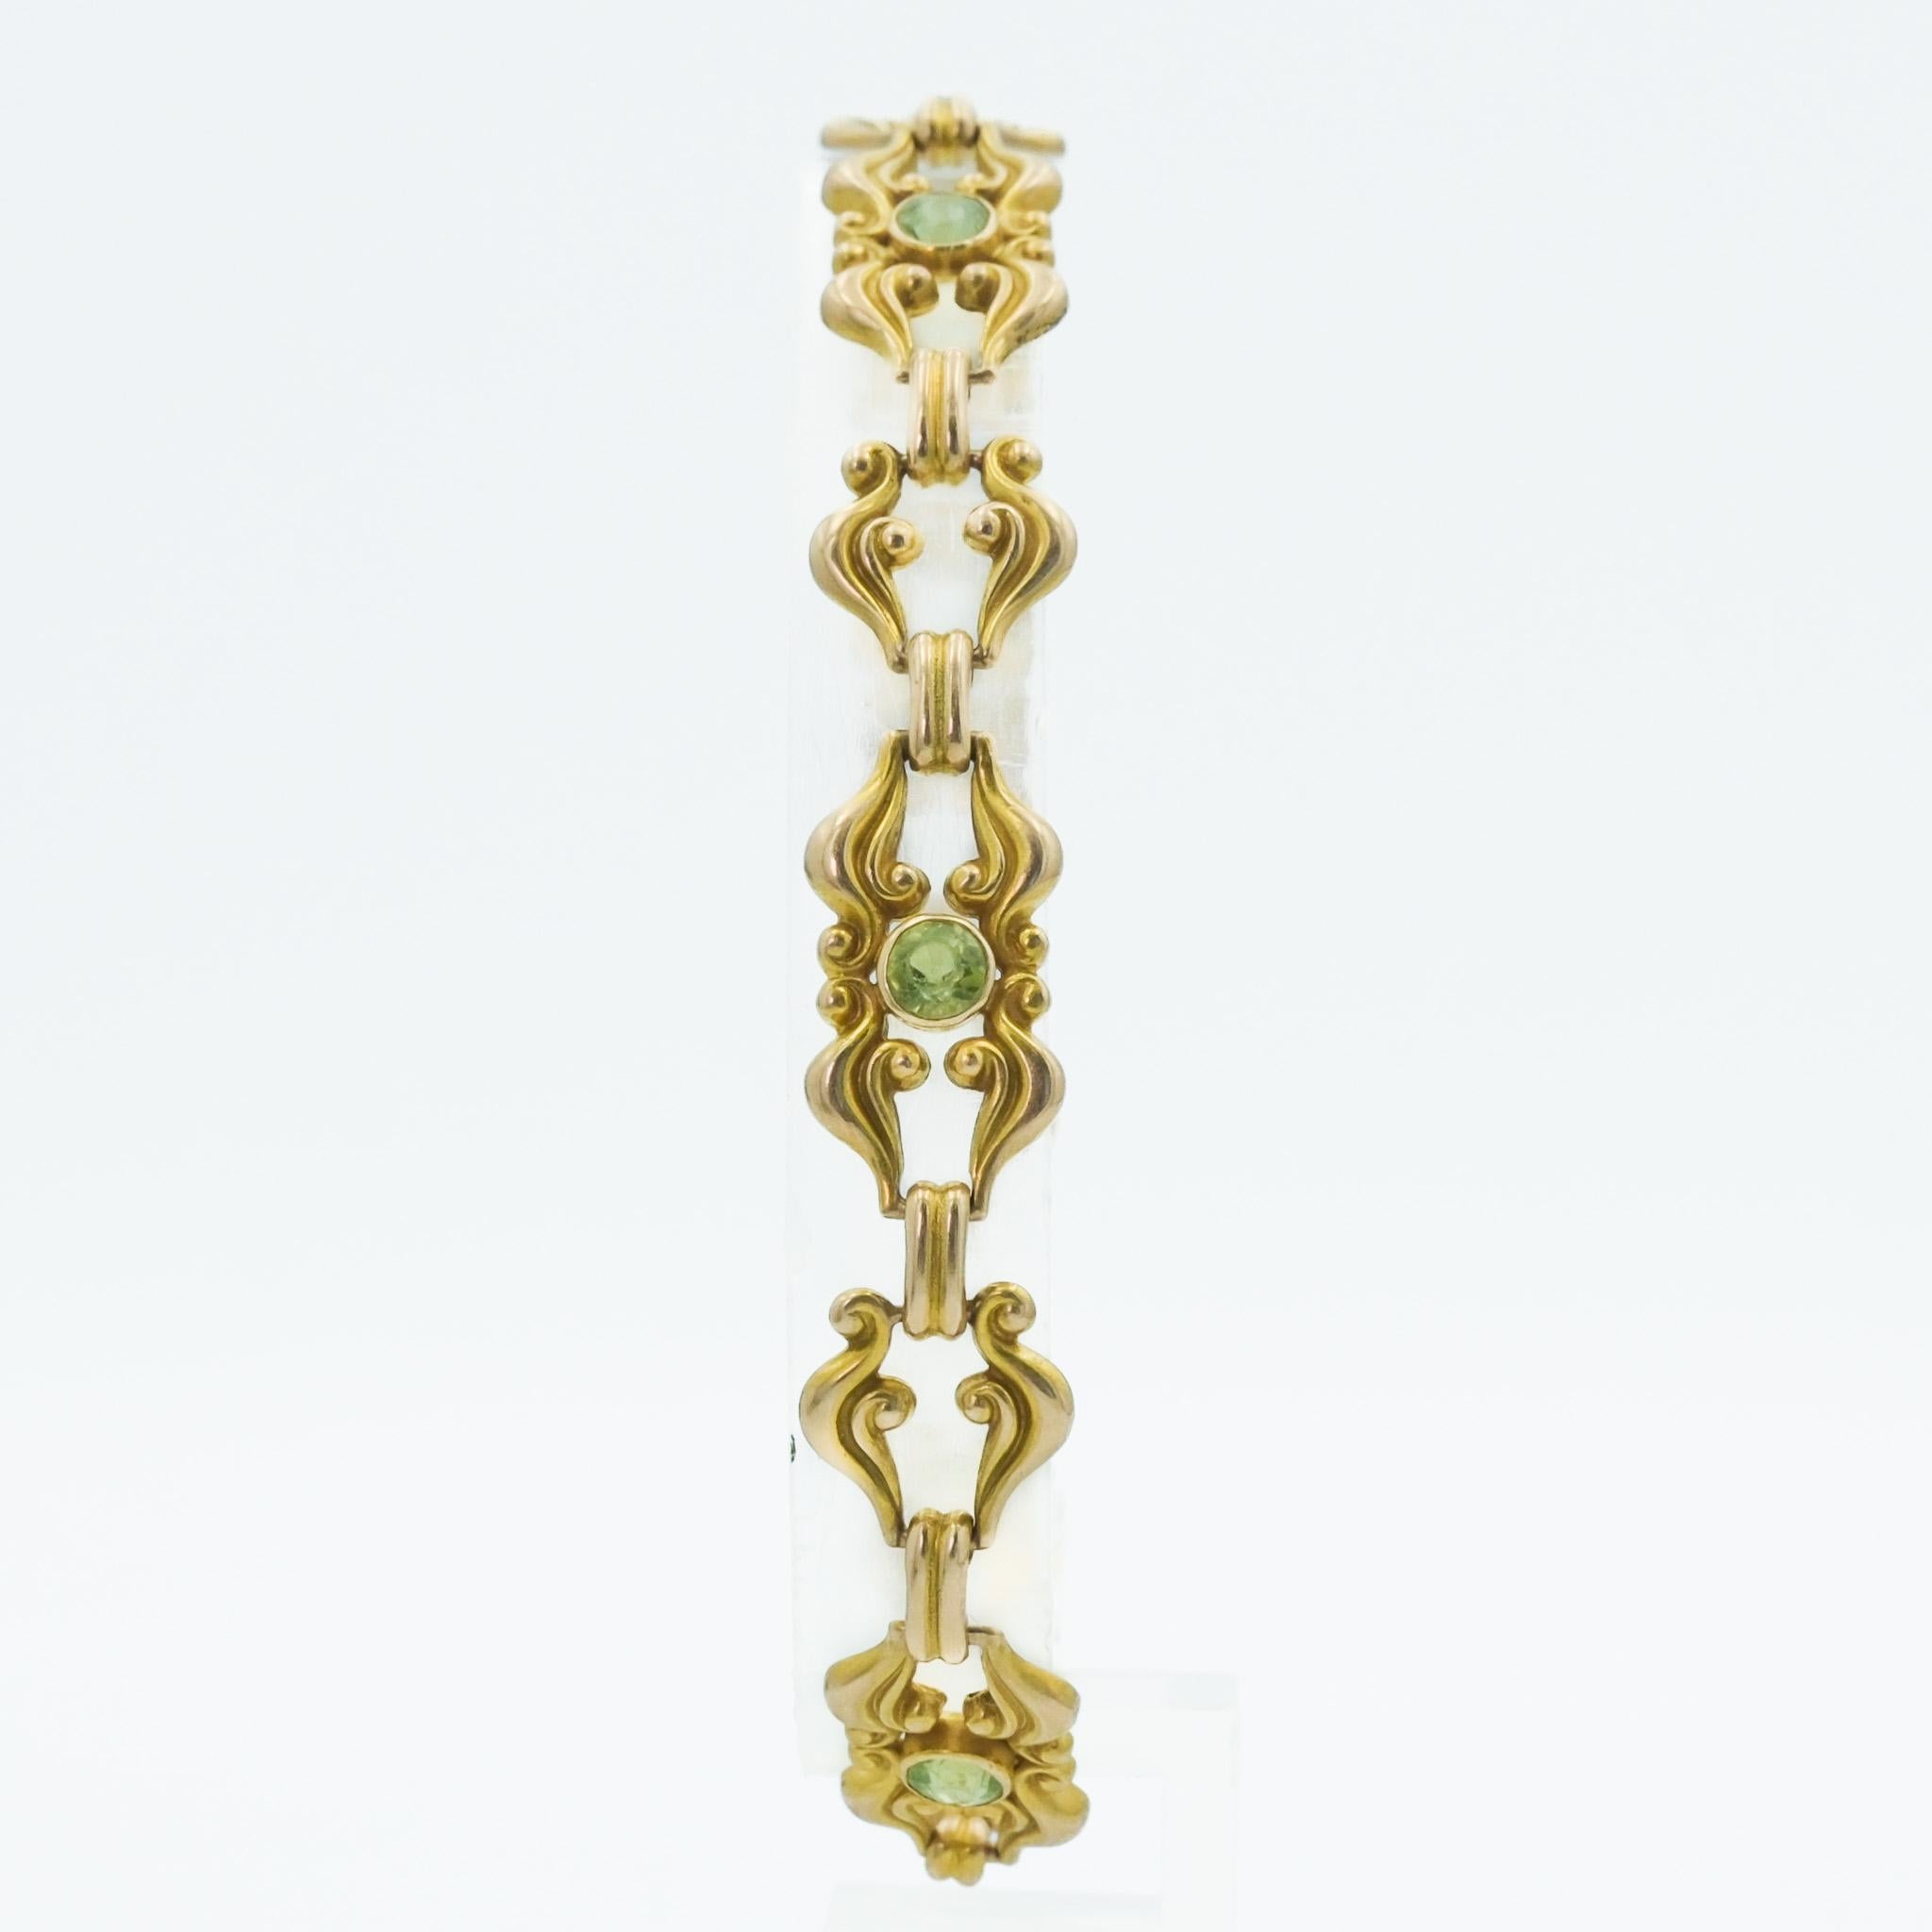 This bracelet an authentic example of the Art Nouveau period, renowned for its artistic emphasis on natural forms and structures. Created in the late 19th to early 20th century, Art Nouveau jewelry is characterized by its flowing lines and